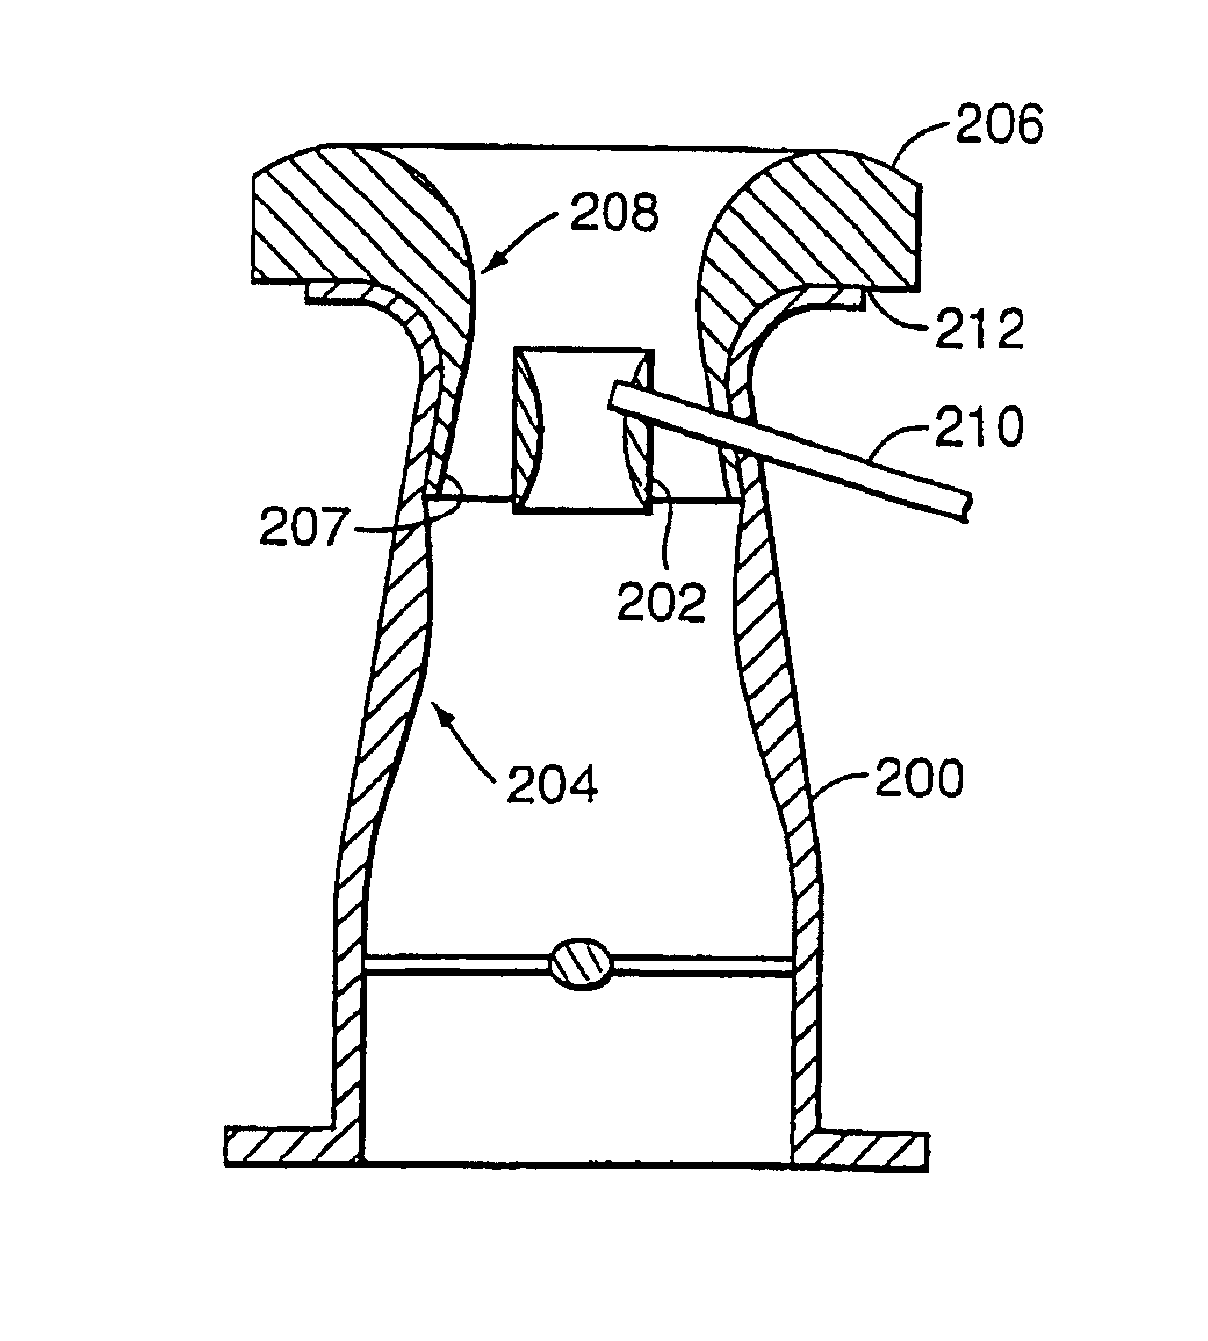 Fluid emulsification systems and methods